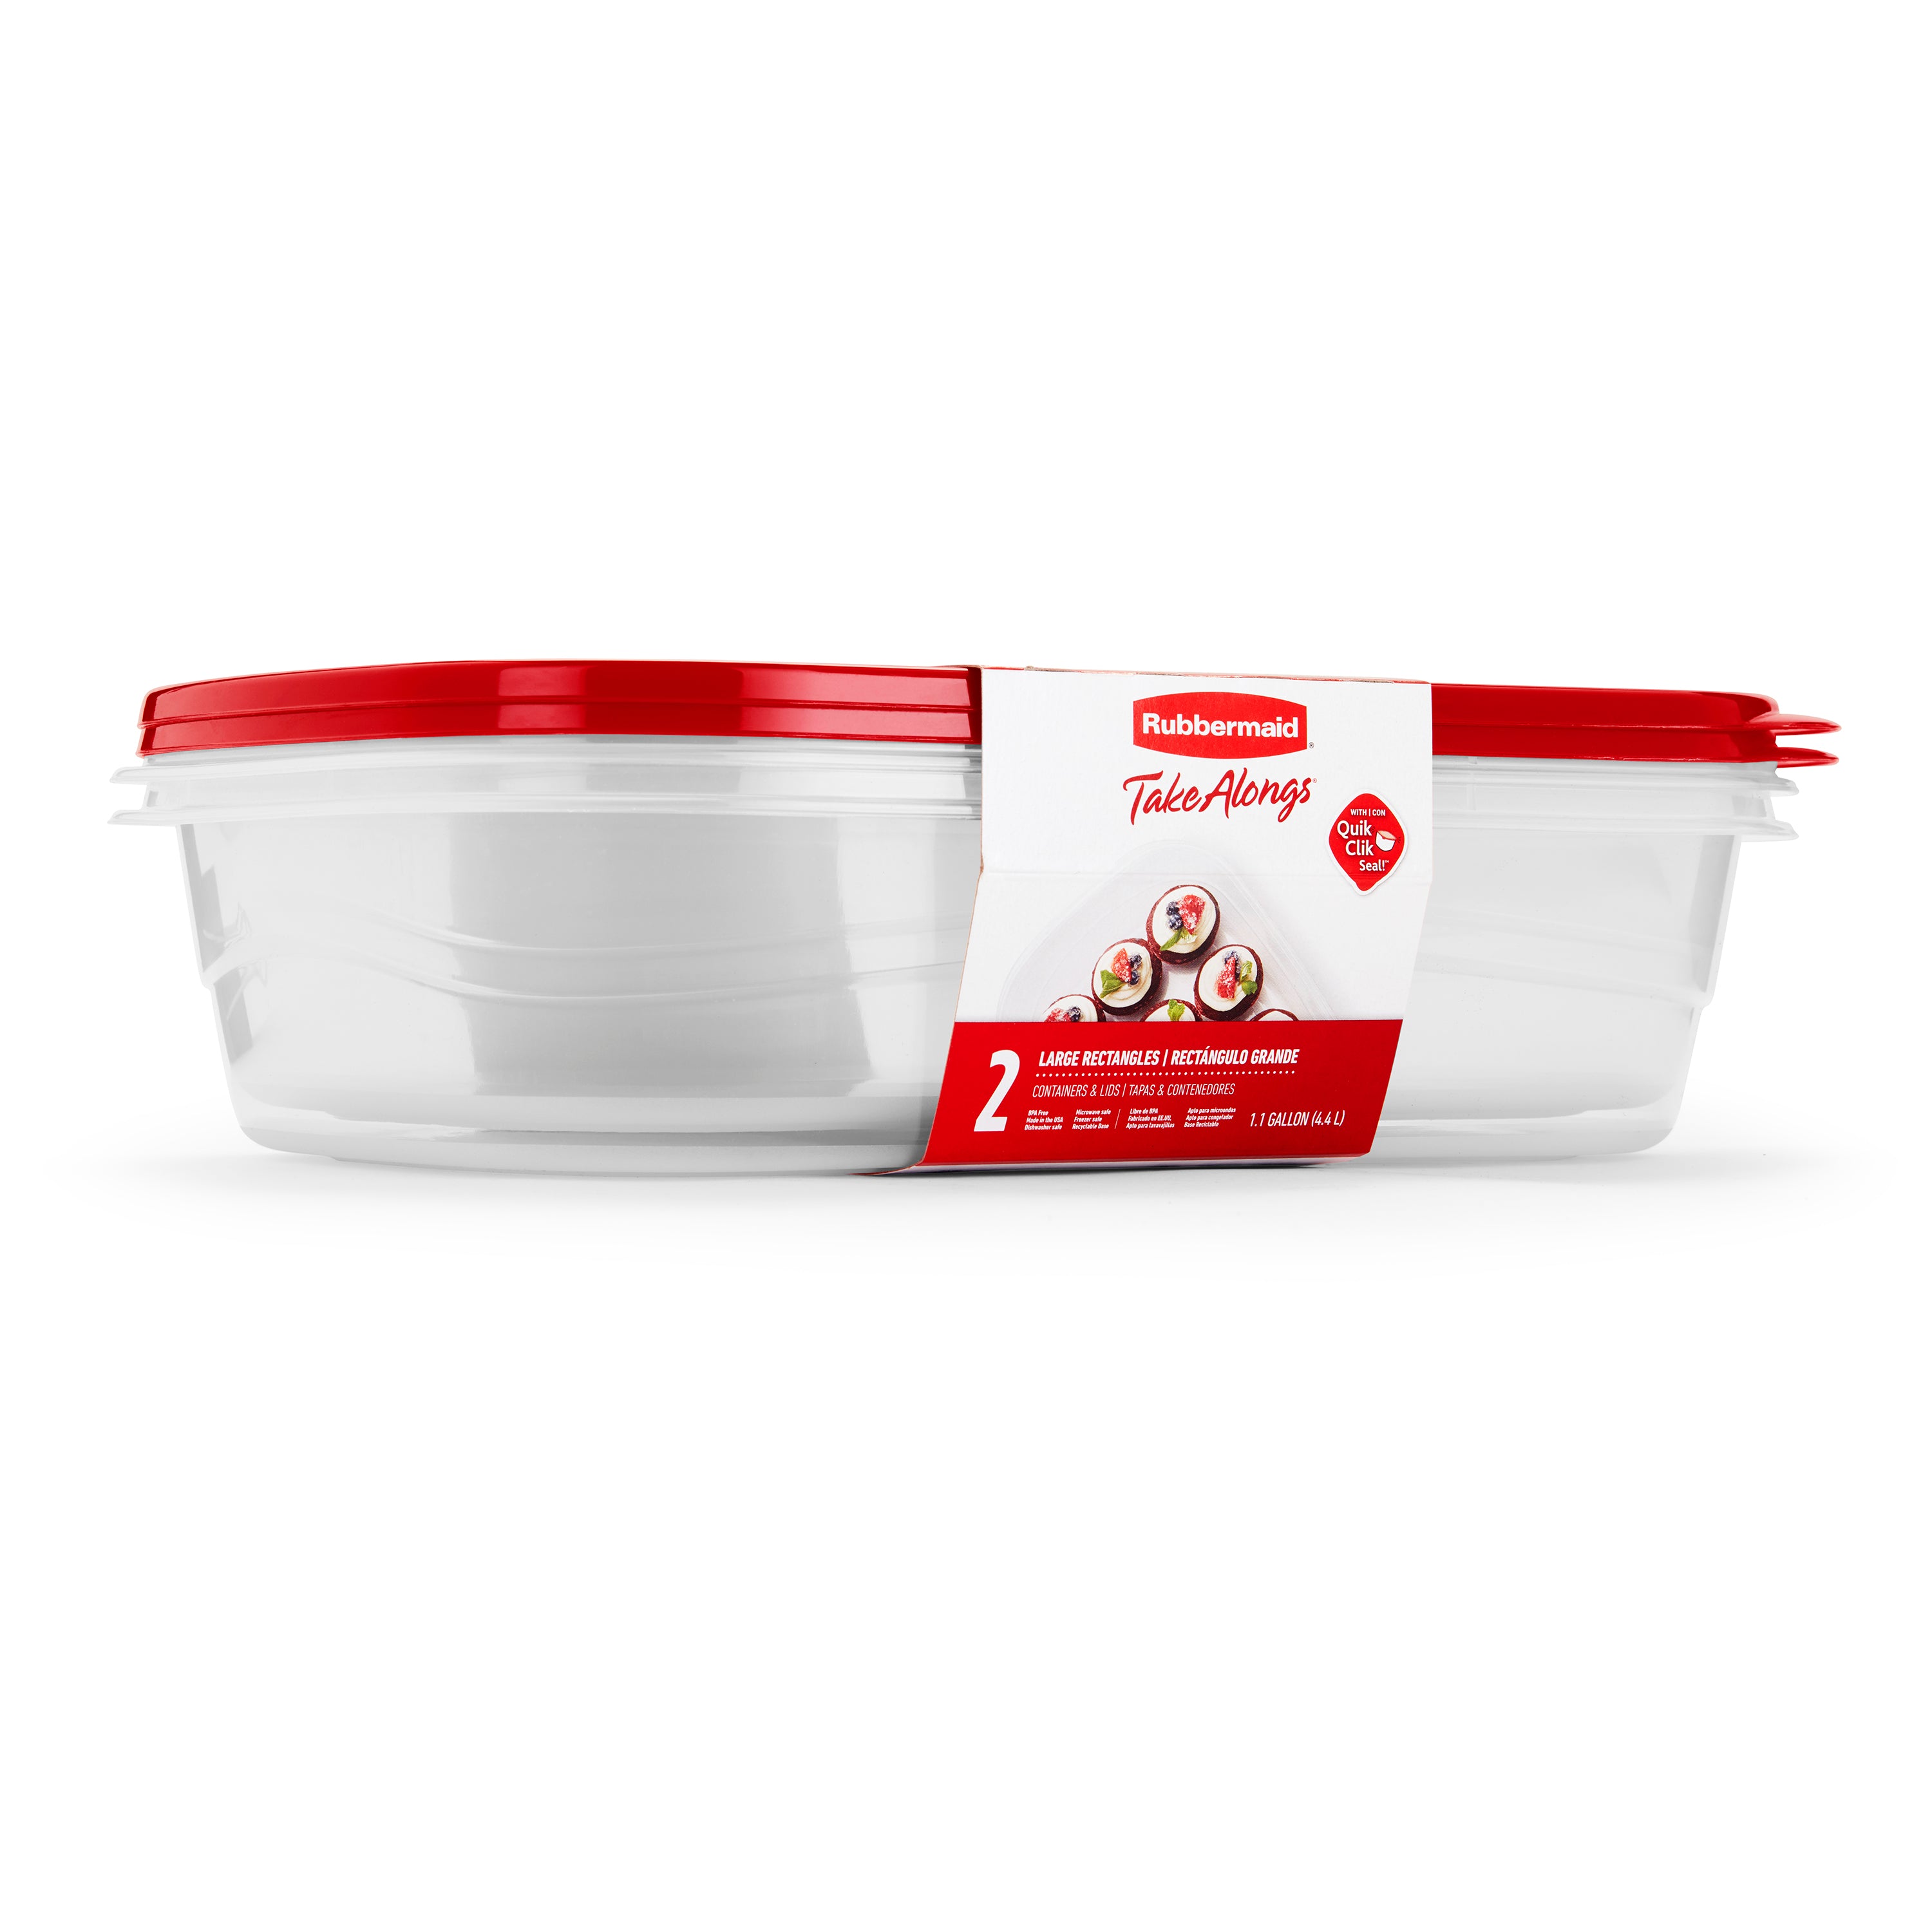 Rubbermaid Cereal Keeper Food Storage Container 1.5 Gallon/5.68